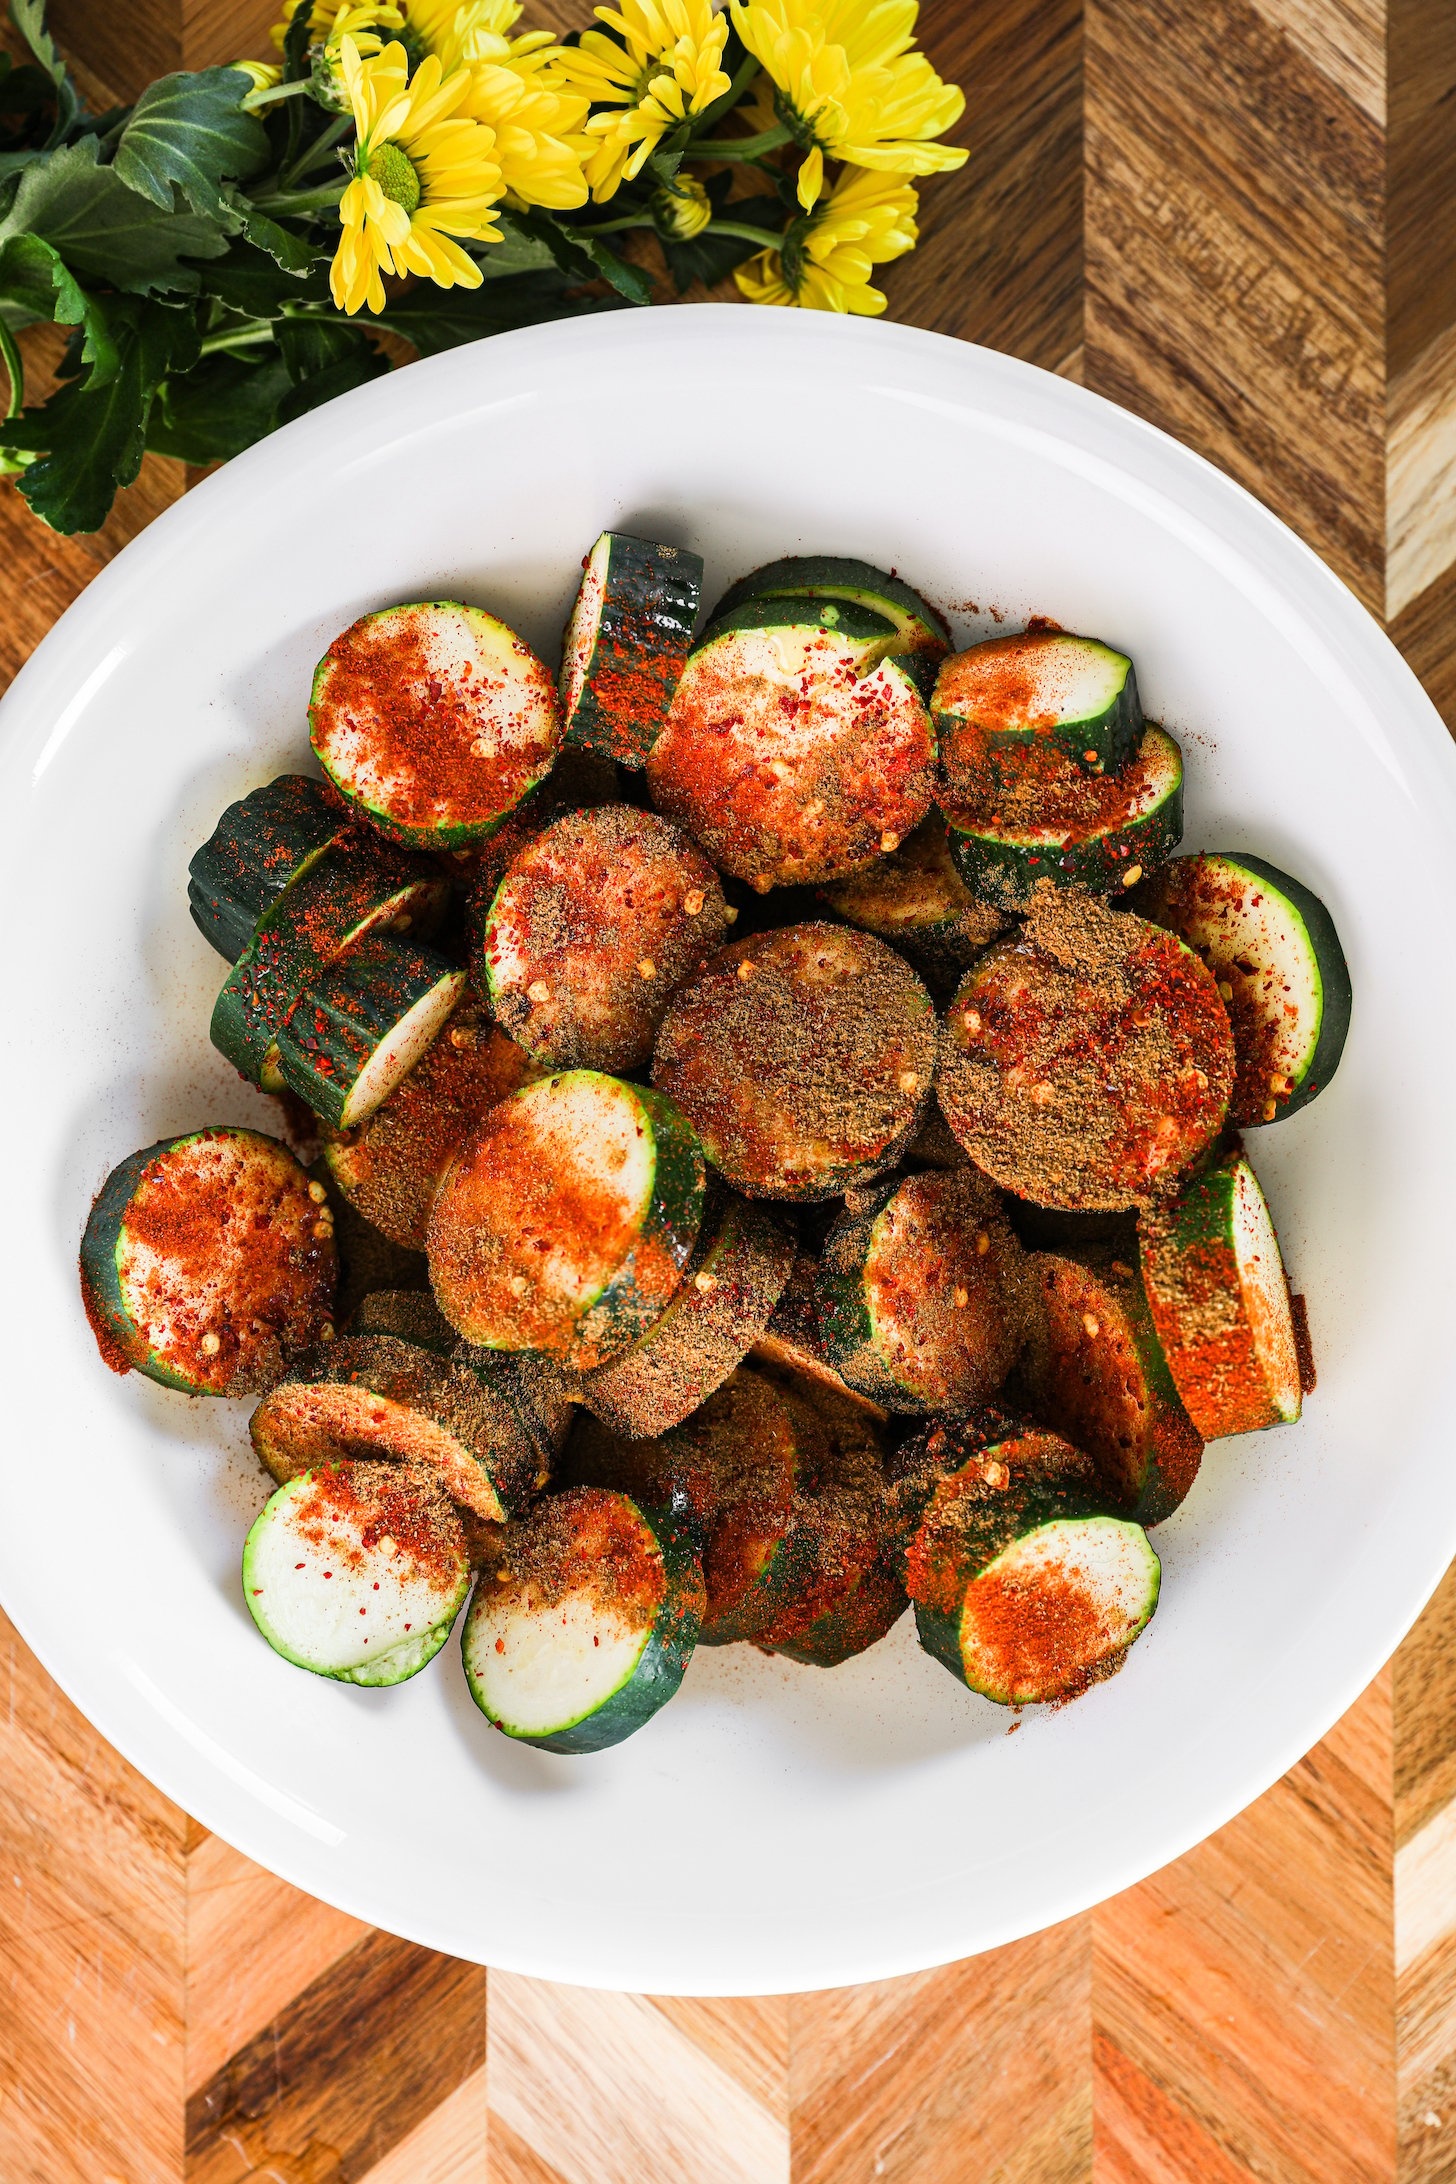 A bowl of zucchini rounds coated in powdered spices.